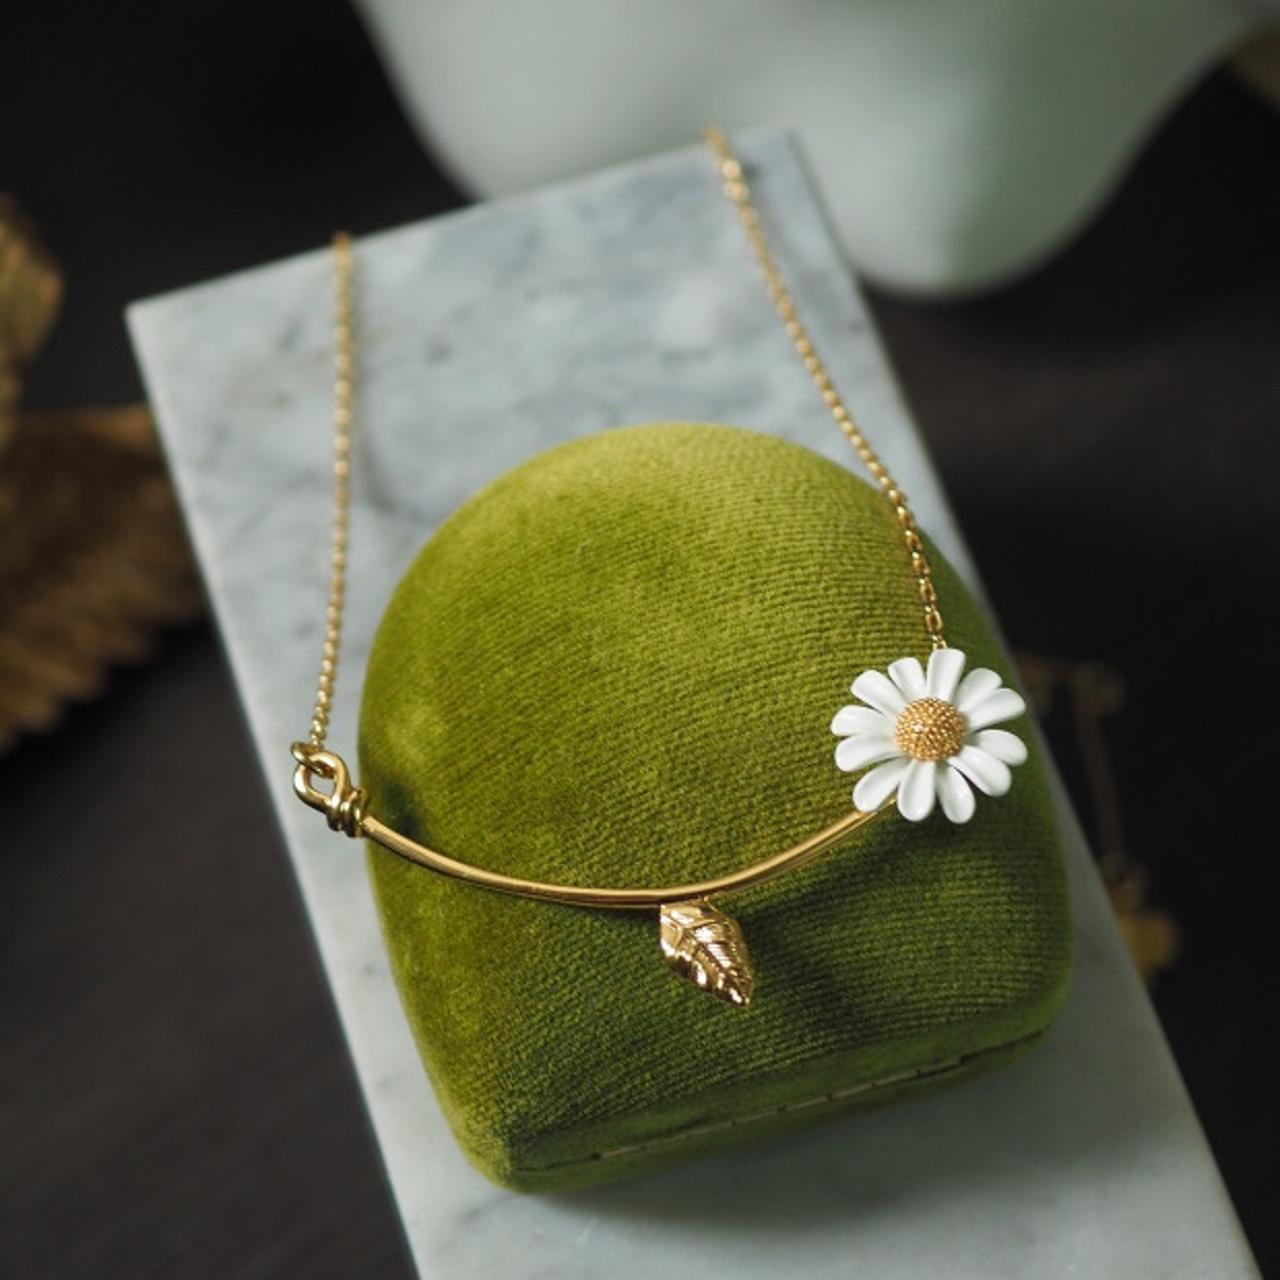 Golden necklace with flower pendant | THOMAS SABO